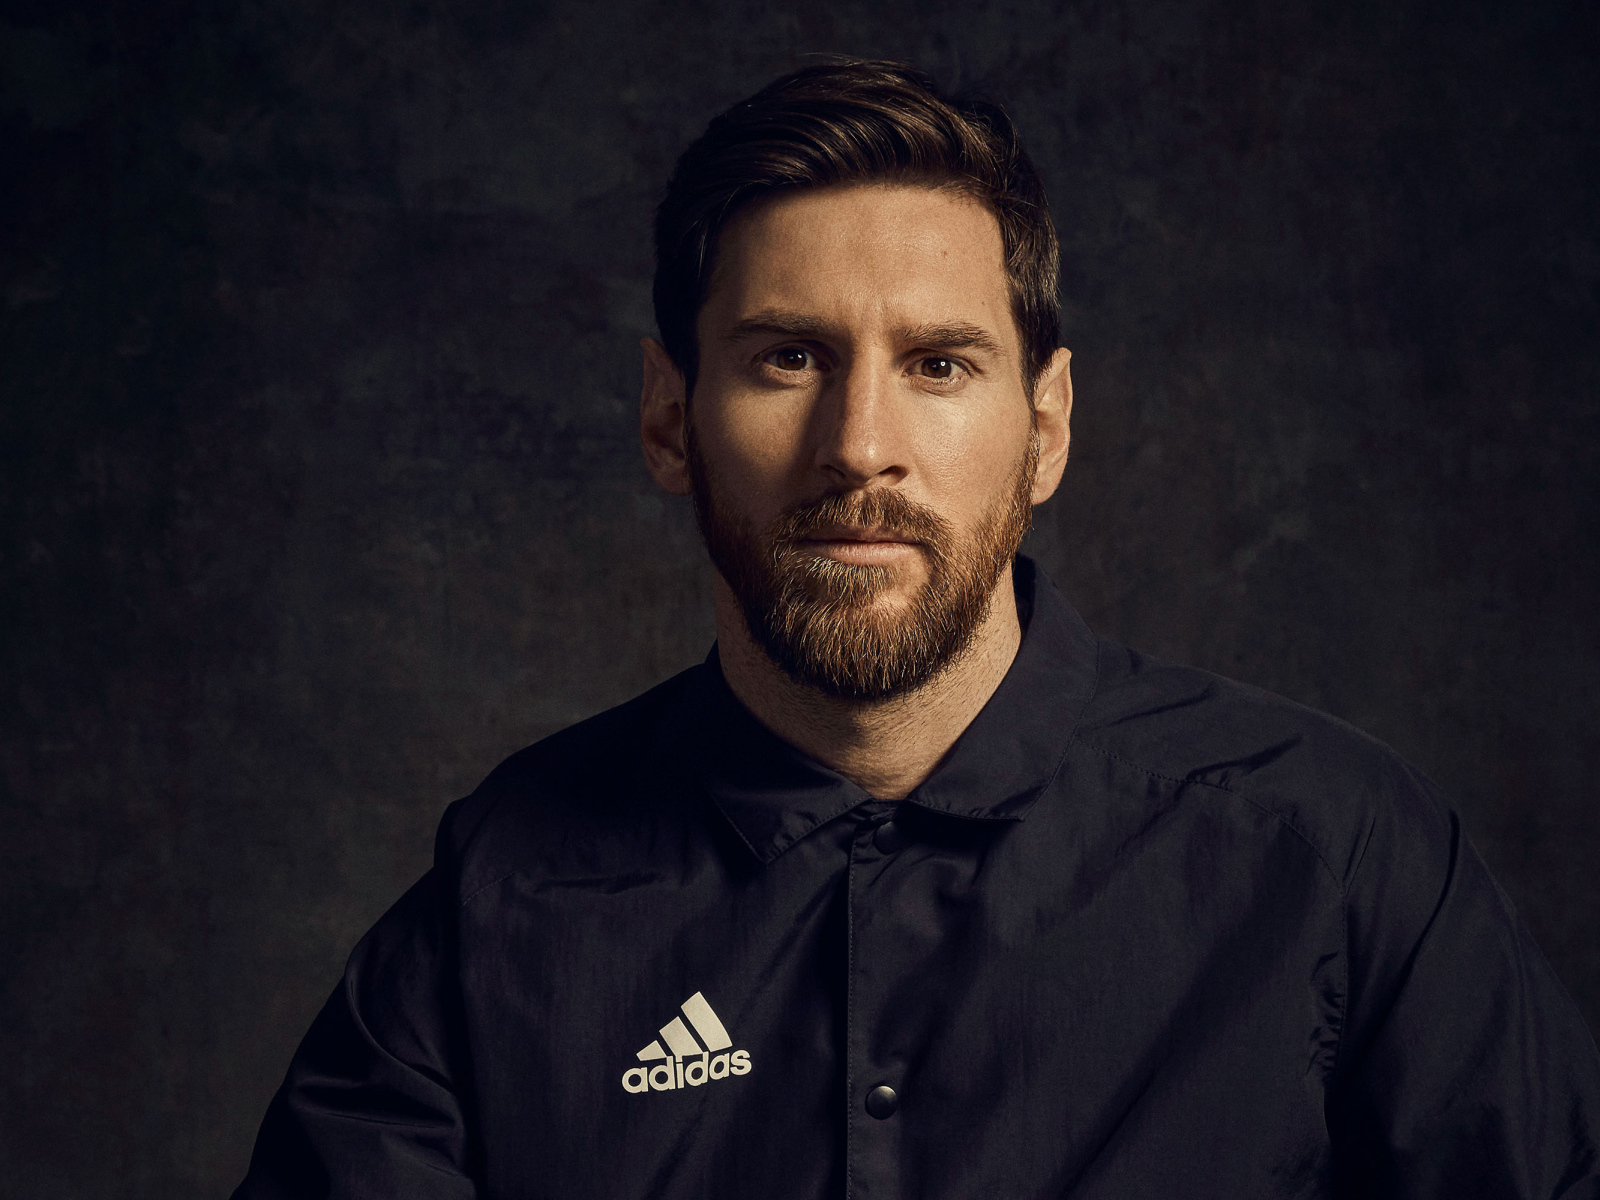 Football player Lionel Messi in a black shirt with a beard